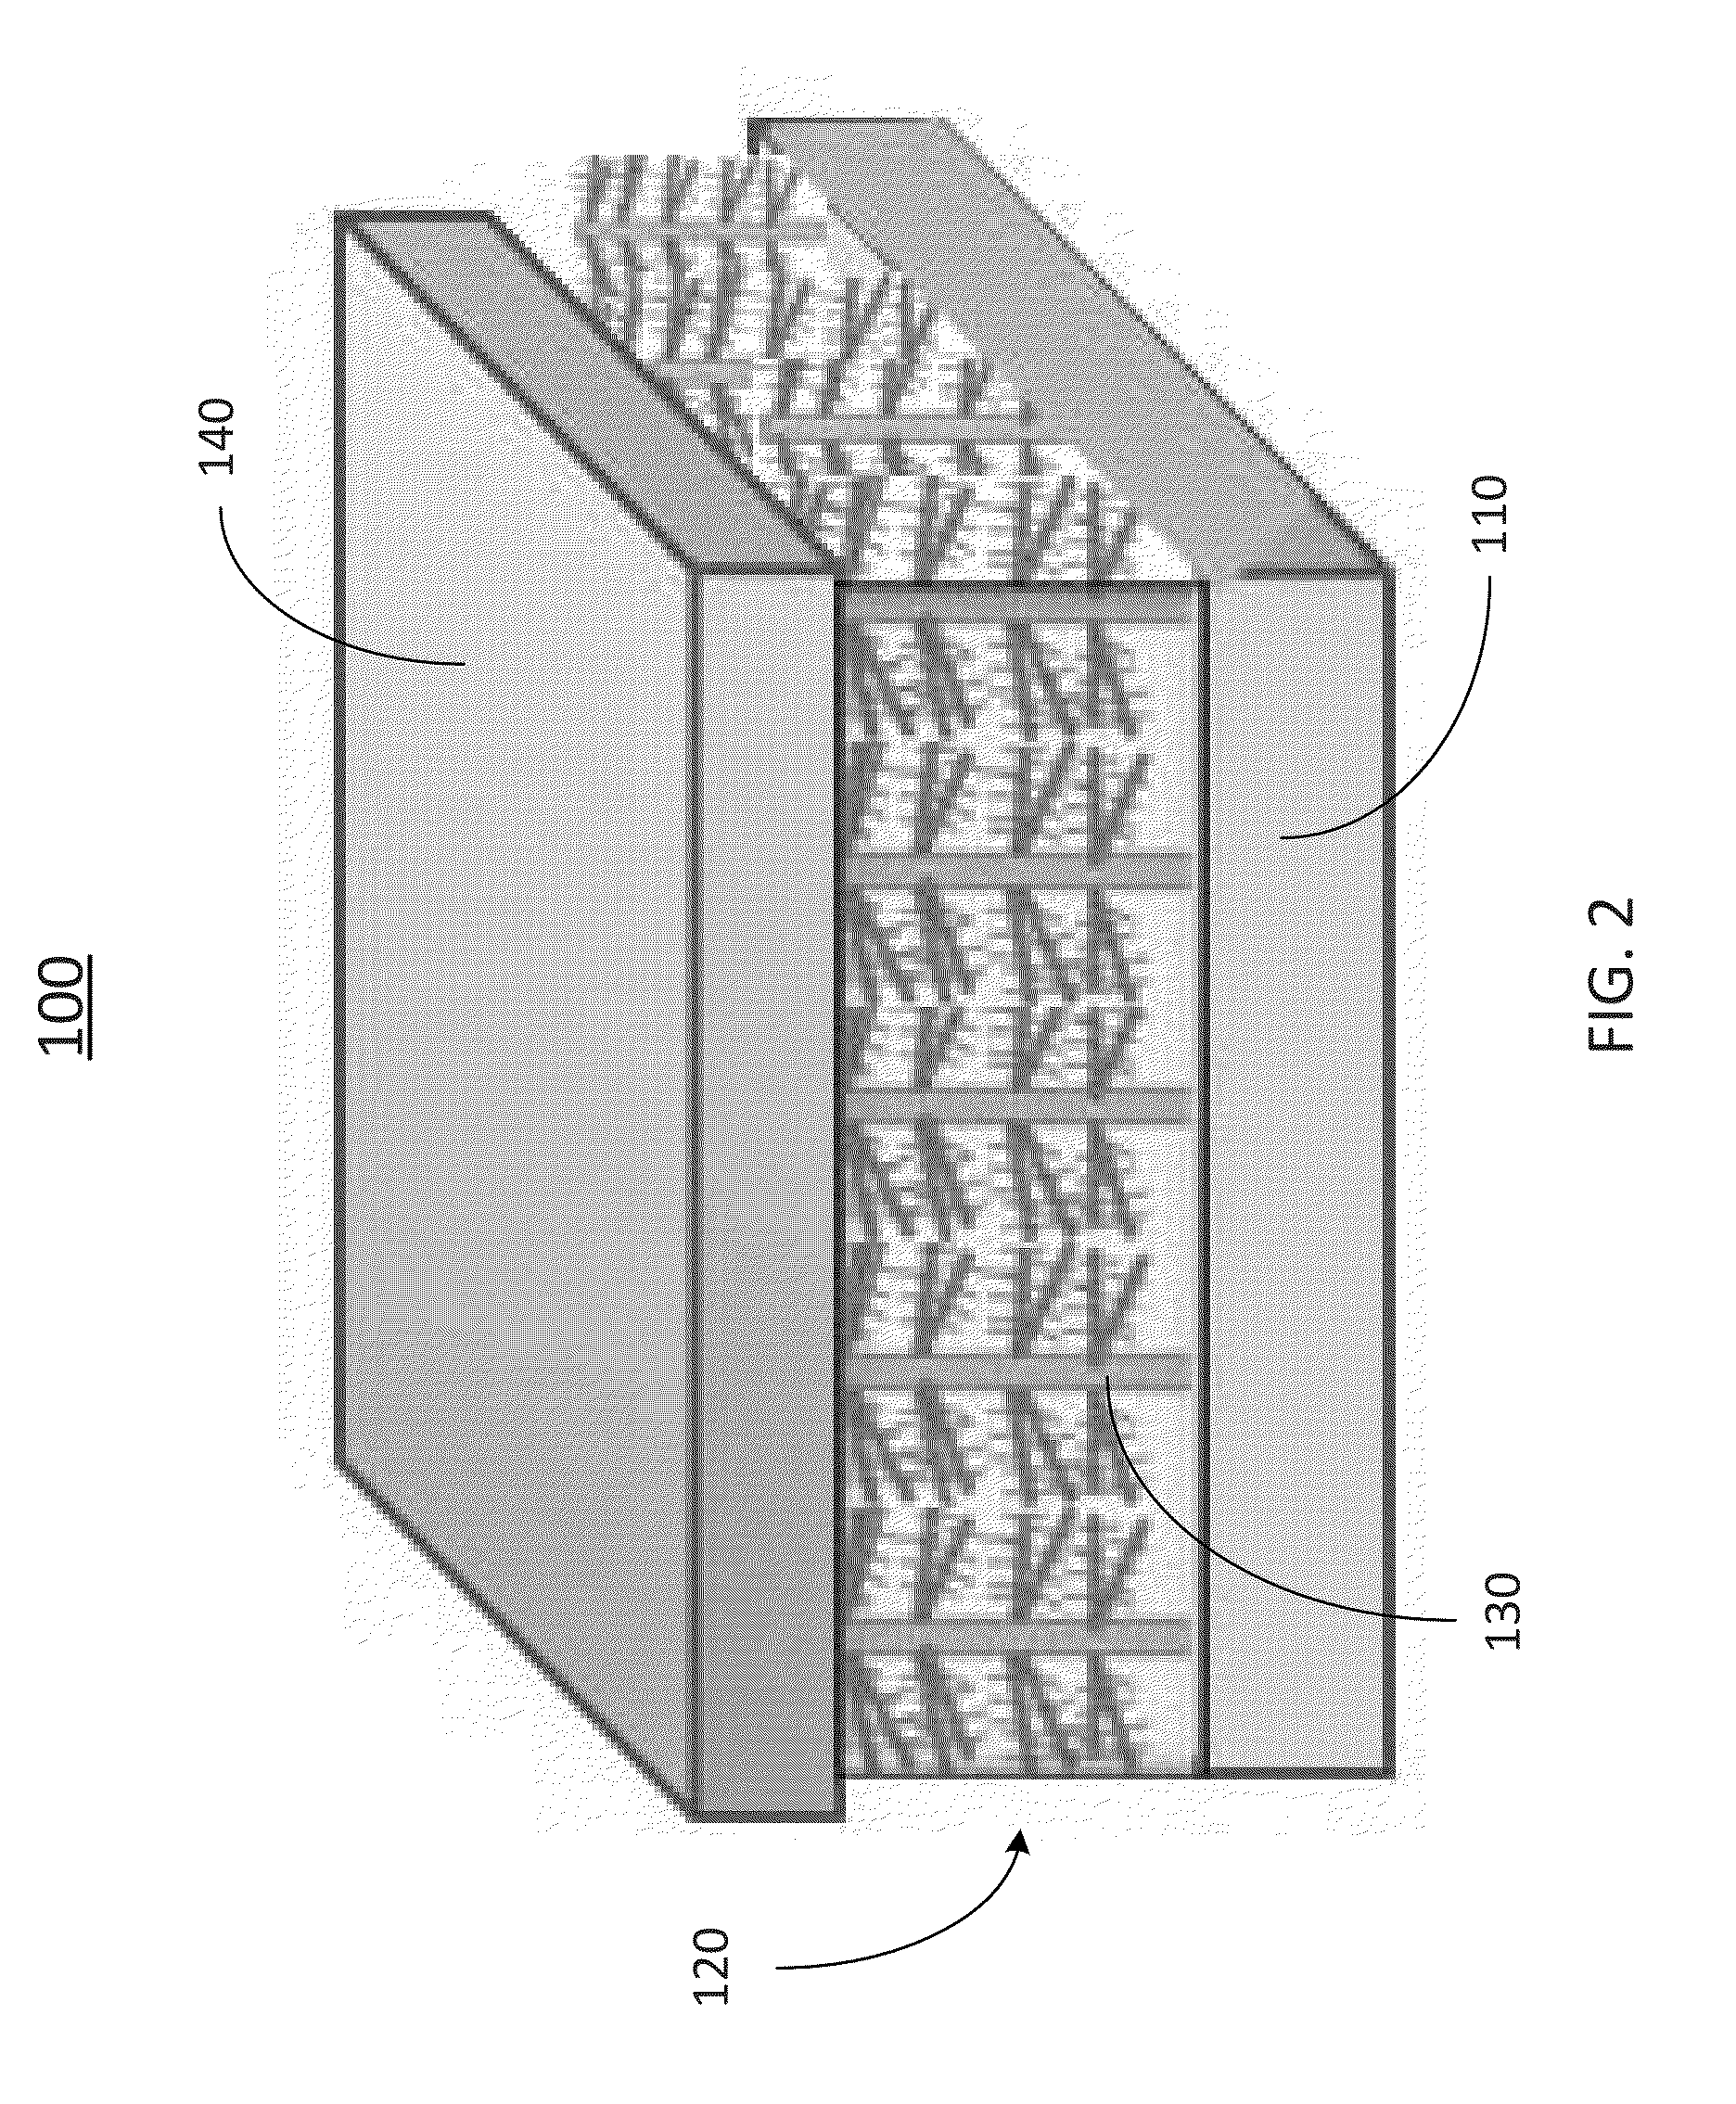 Core-shell nanostructure based photovoltaic cells and methods of making same